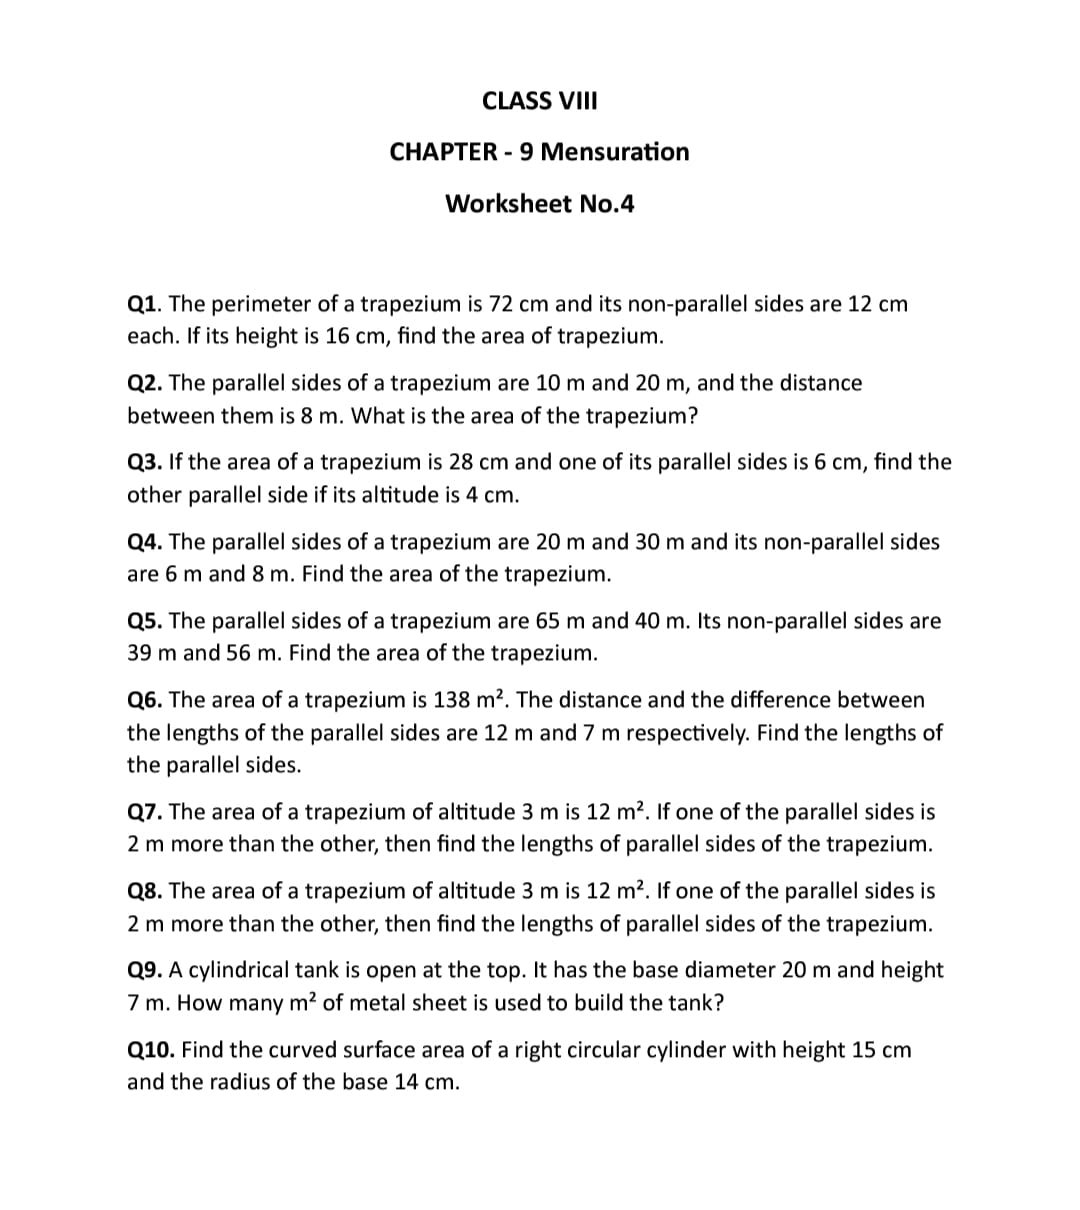 Mensuration class 8 extra Questions